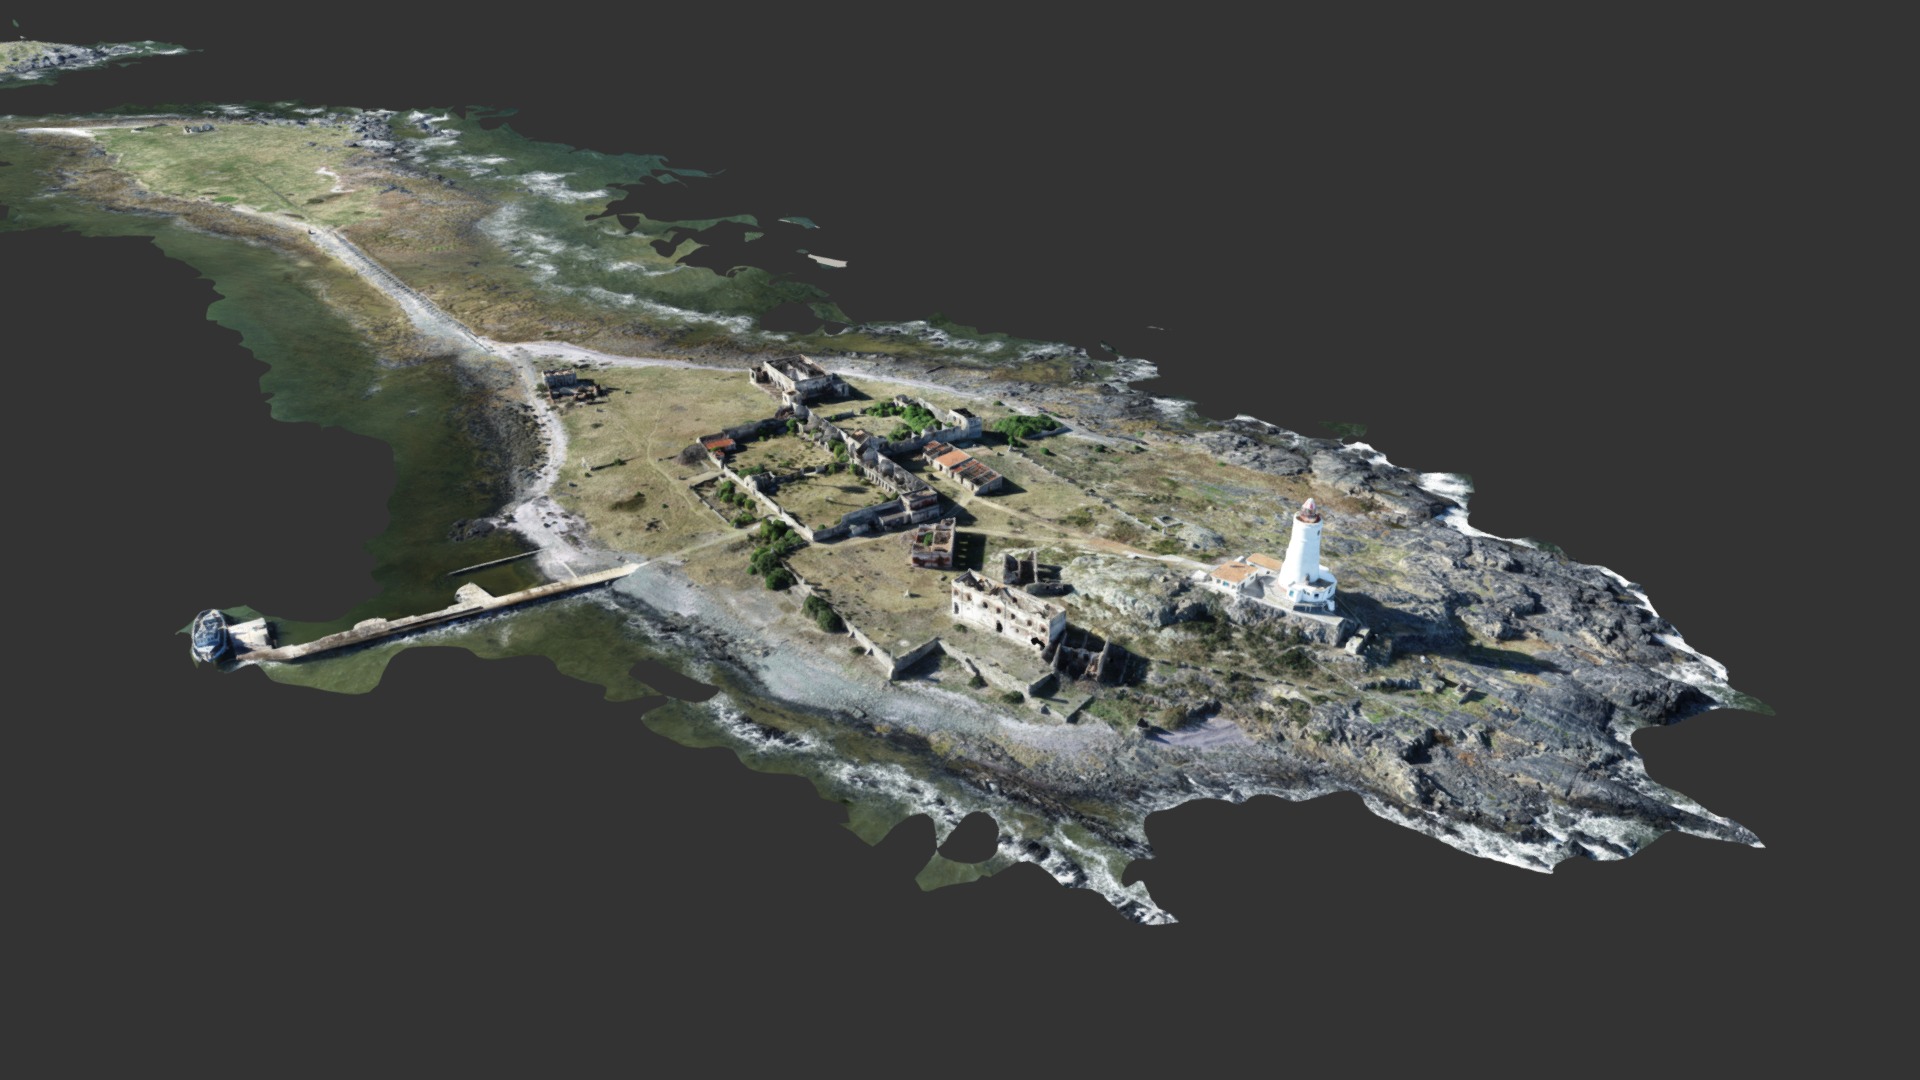 3D model Isla de Flores, Montevideo, Uruguay. - This is a 3D model of the Isla de Flores, Montevideo, Uruguay.. The 3D model is about a lighthouse on a rocky island.